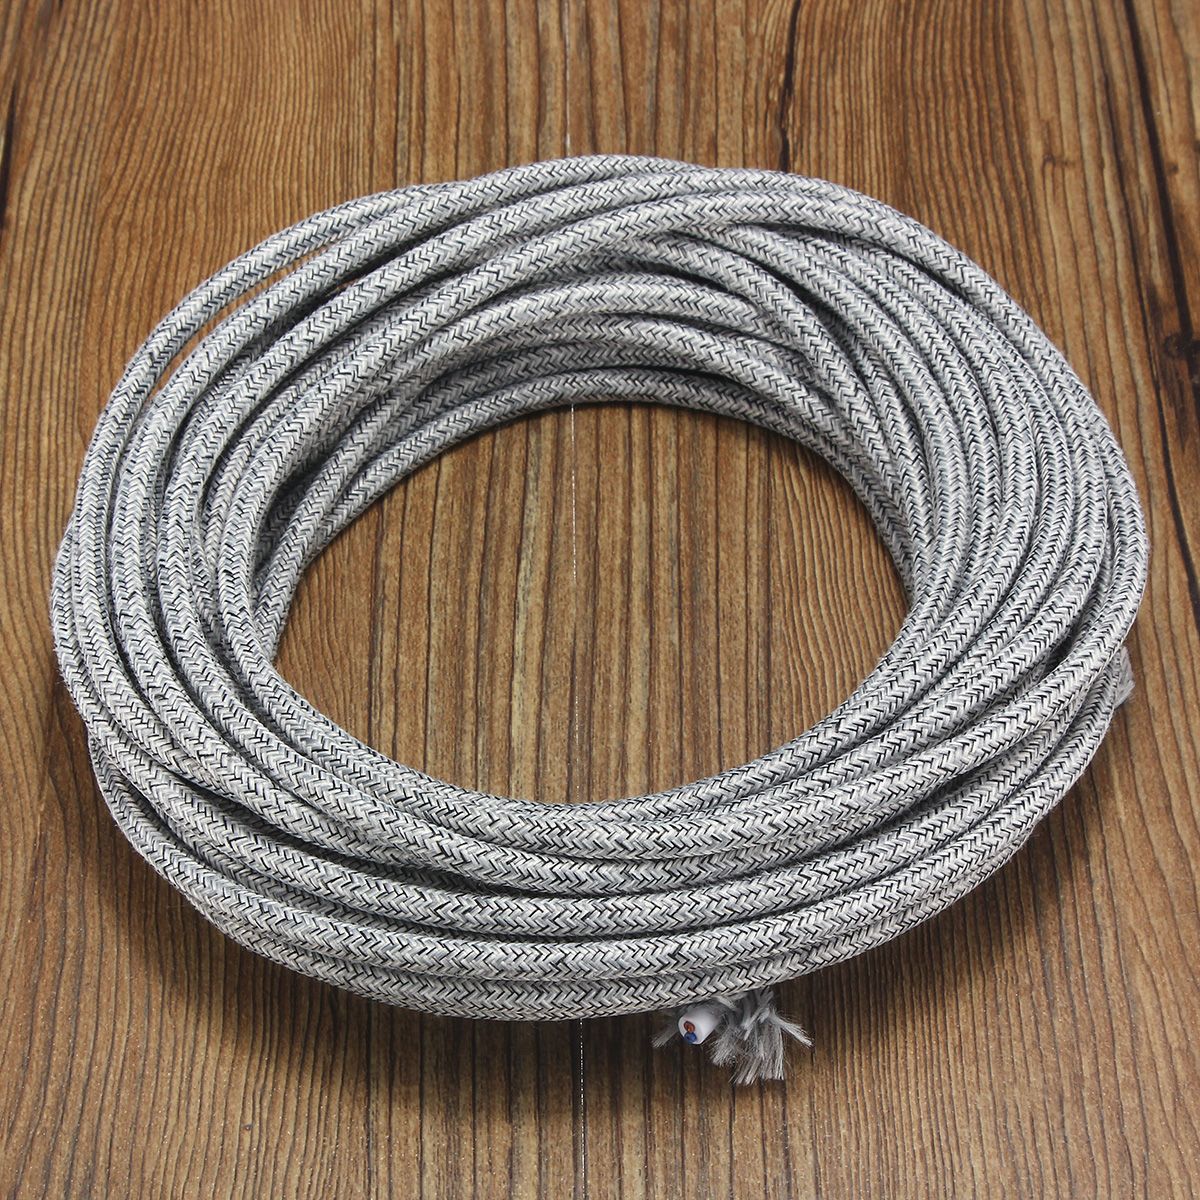 10M-2-Cord-Color-Vintage-Twist-Braided-Fabric-Light-Cable-Electric-Wire-1069140